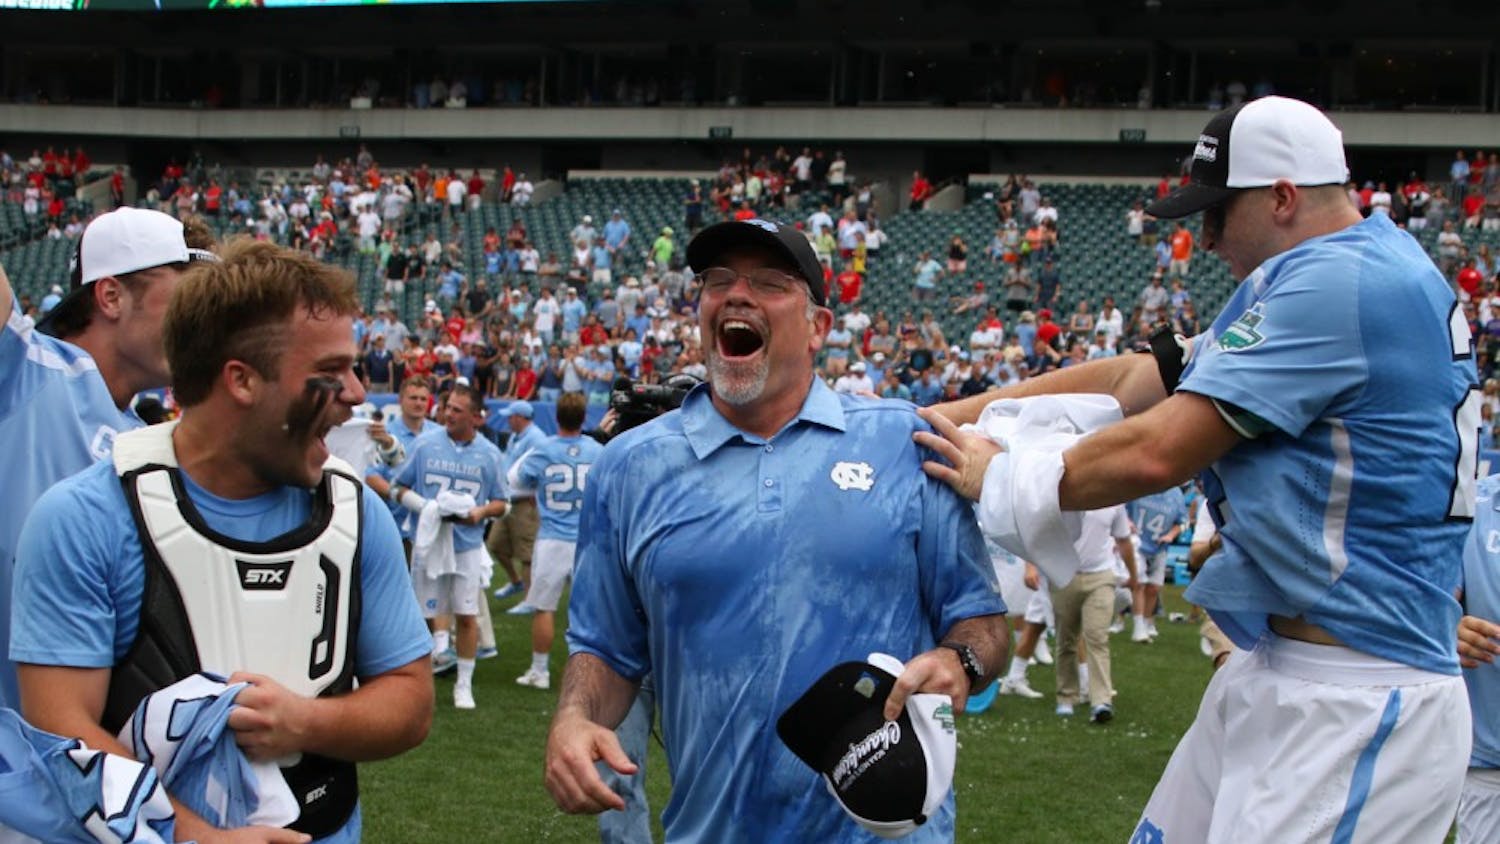 UNC men's lacrosse coach Joe Breschi runs towards his players after being given a gatorade bath.&nbsp;The unseeded North Carolina men's lacrosse team defeated No. 1 Maryland 14-13 in overtime to claim the program's first national championship since 1993 on Monday at Lincoln Financial Field in Philadelphia.